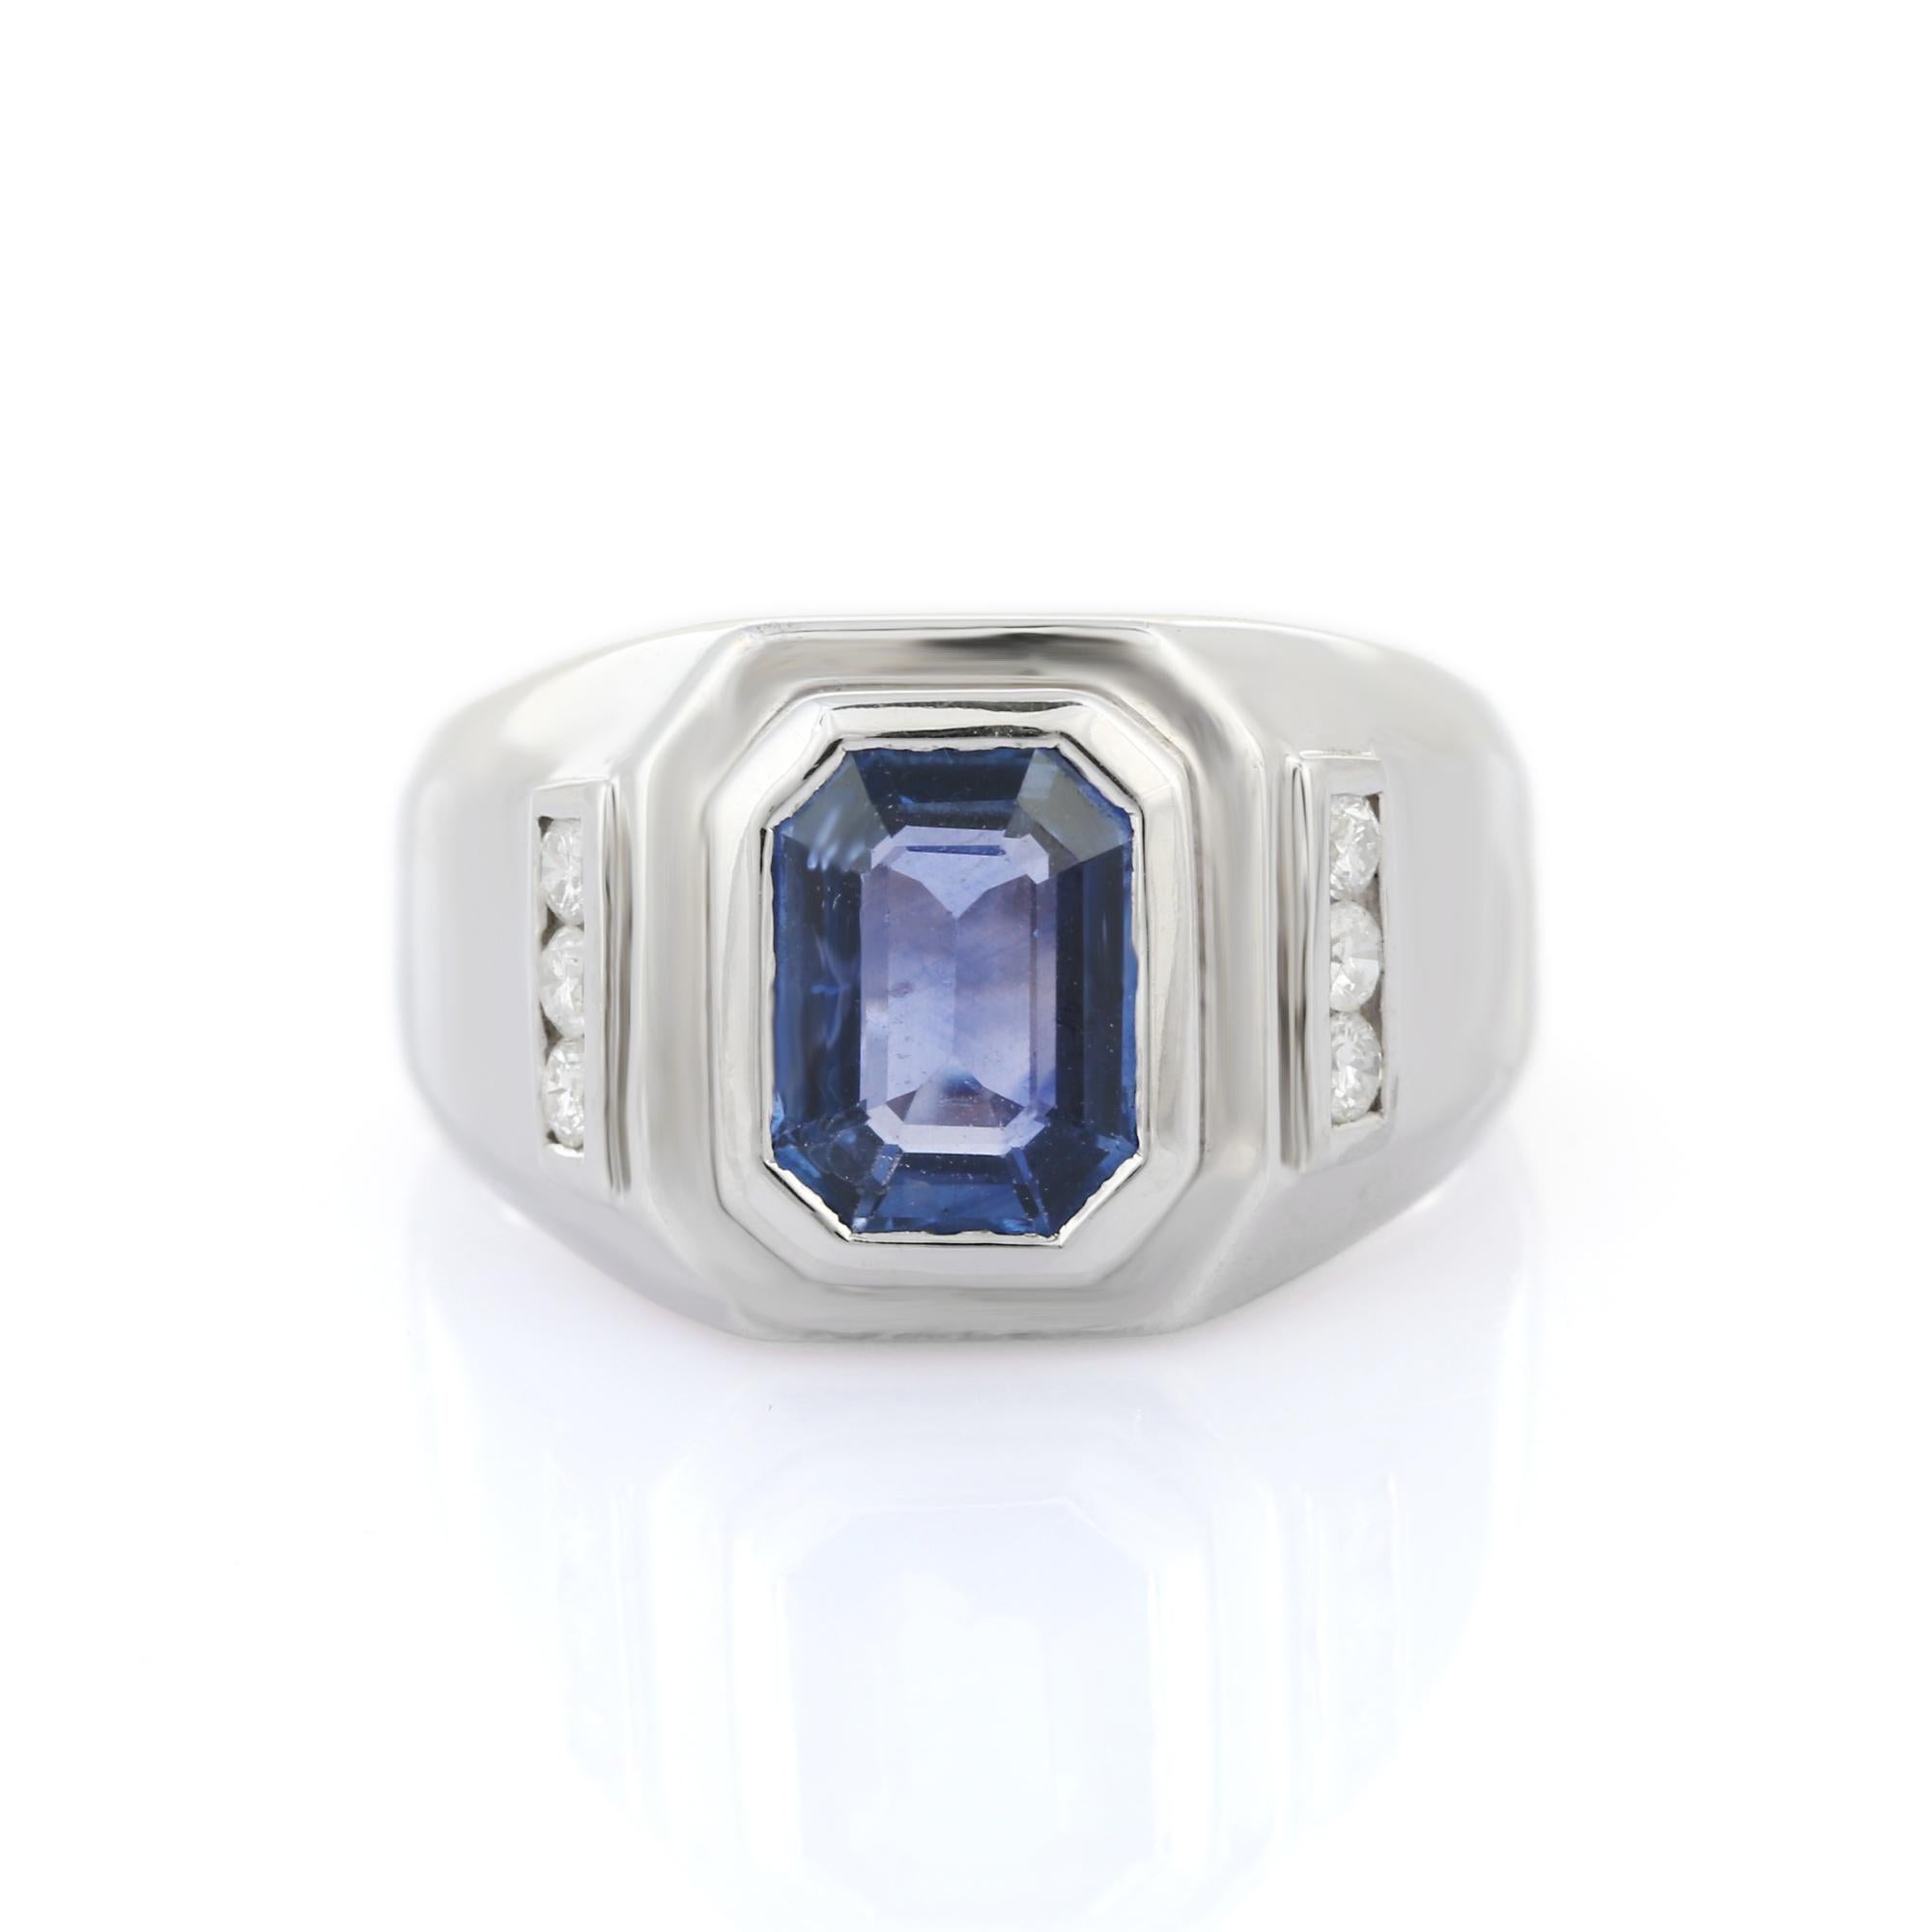 For Sale:  1.7 CTW Octagon Cut Blue Sapphire and Diamond Men's Wedding Ring 18k White Gold 5